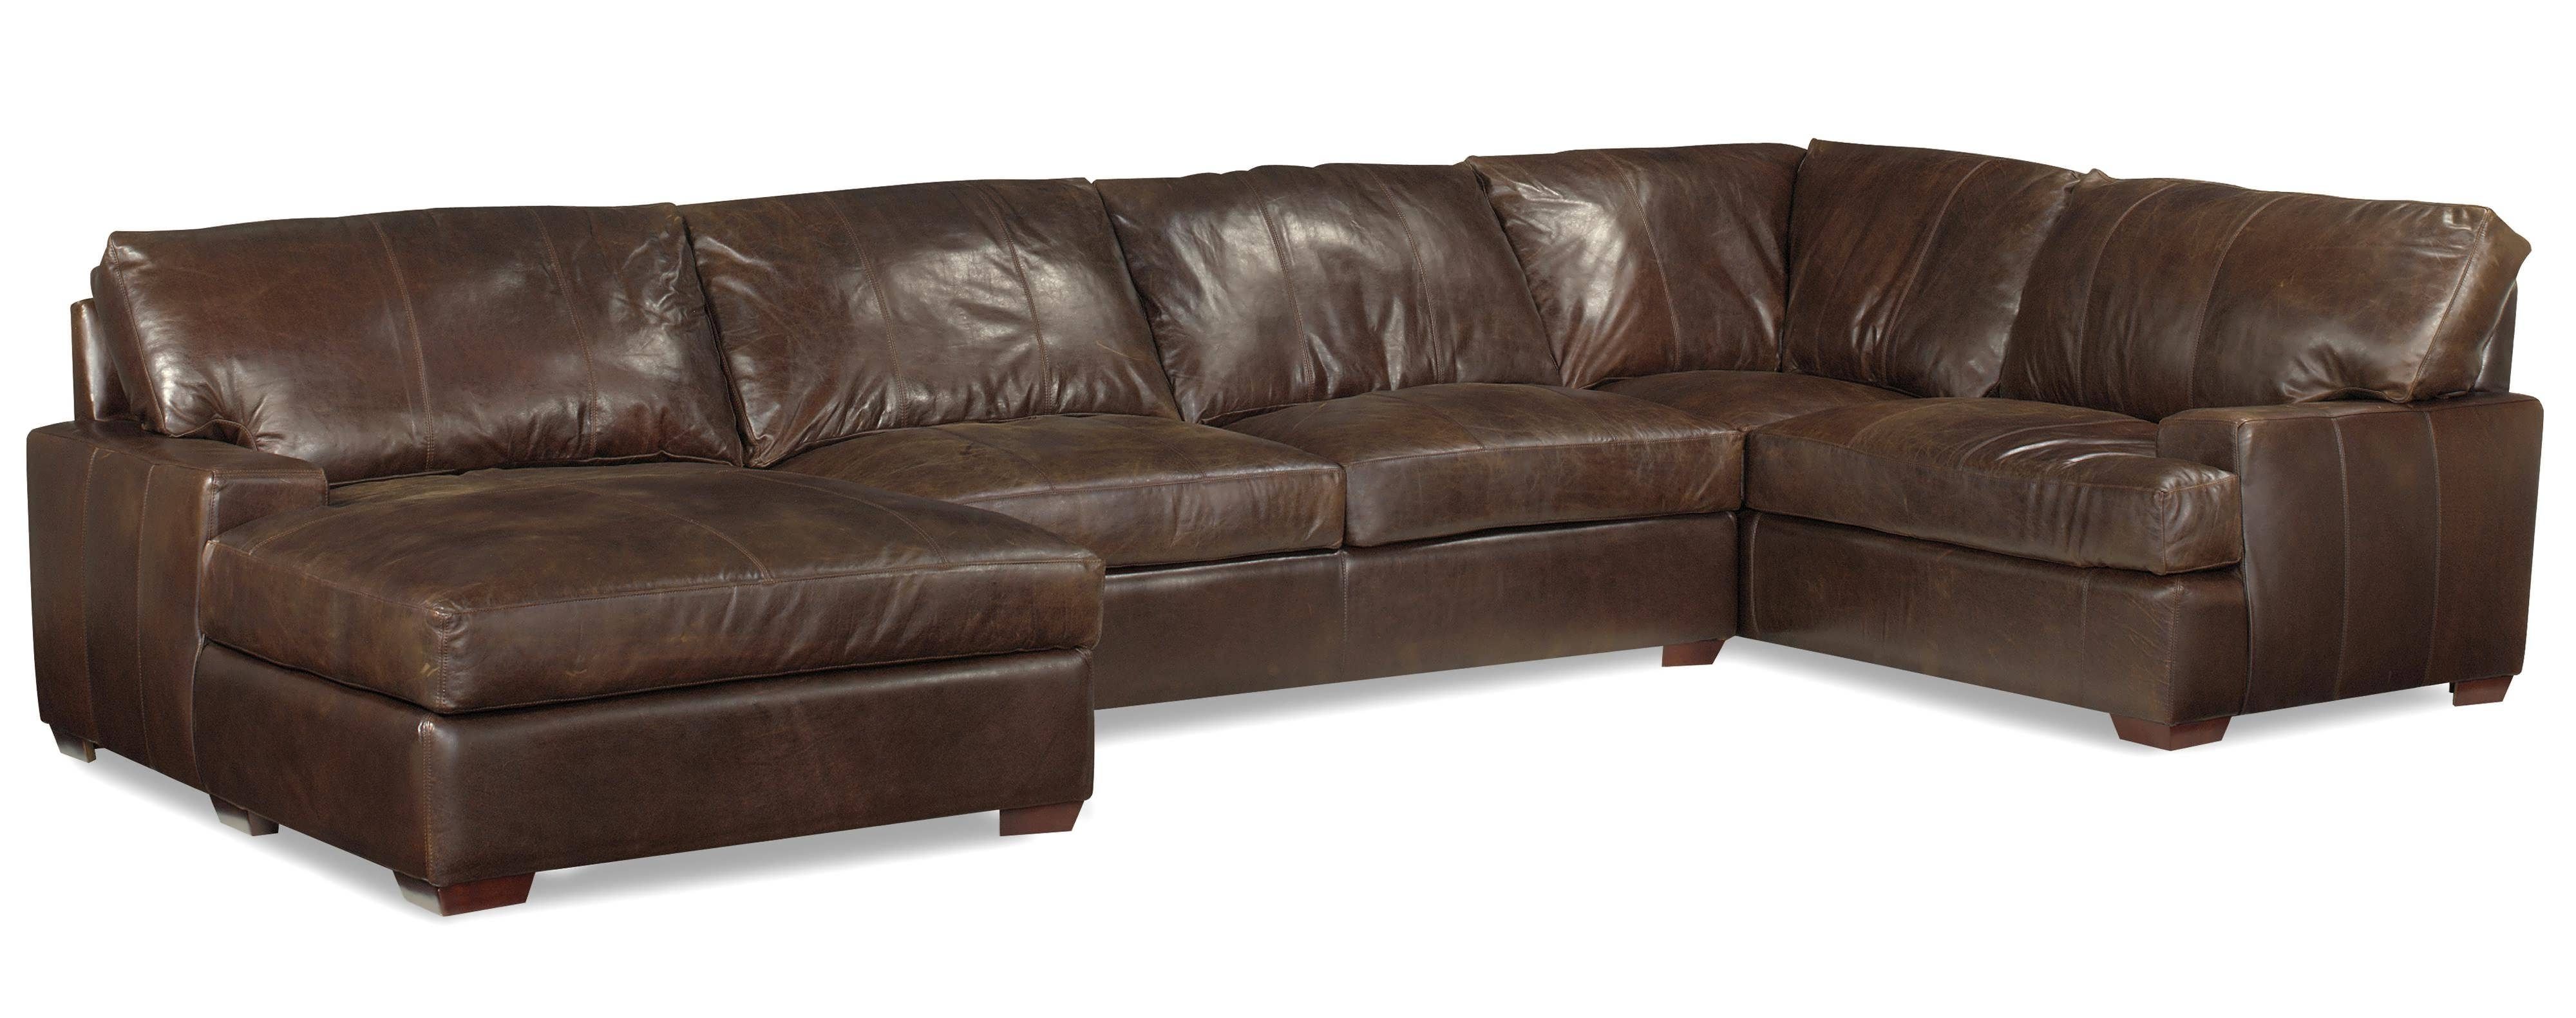 abbot sectional chaise sofa leather